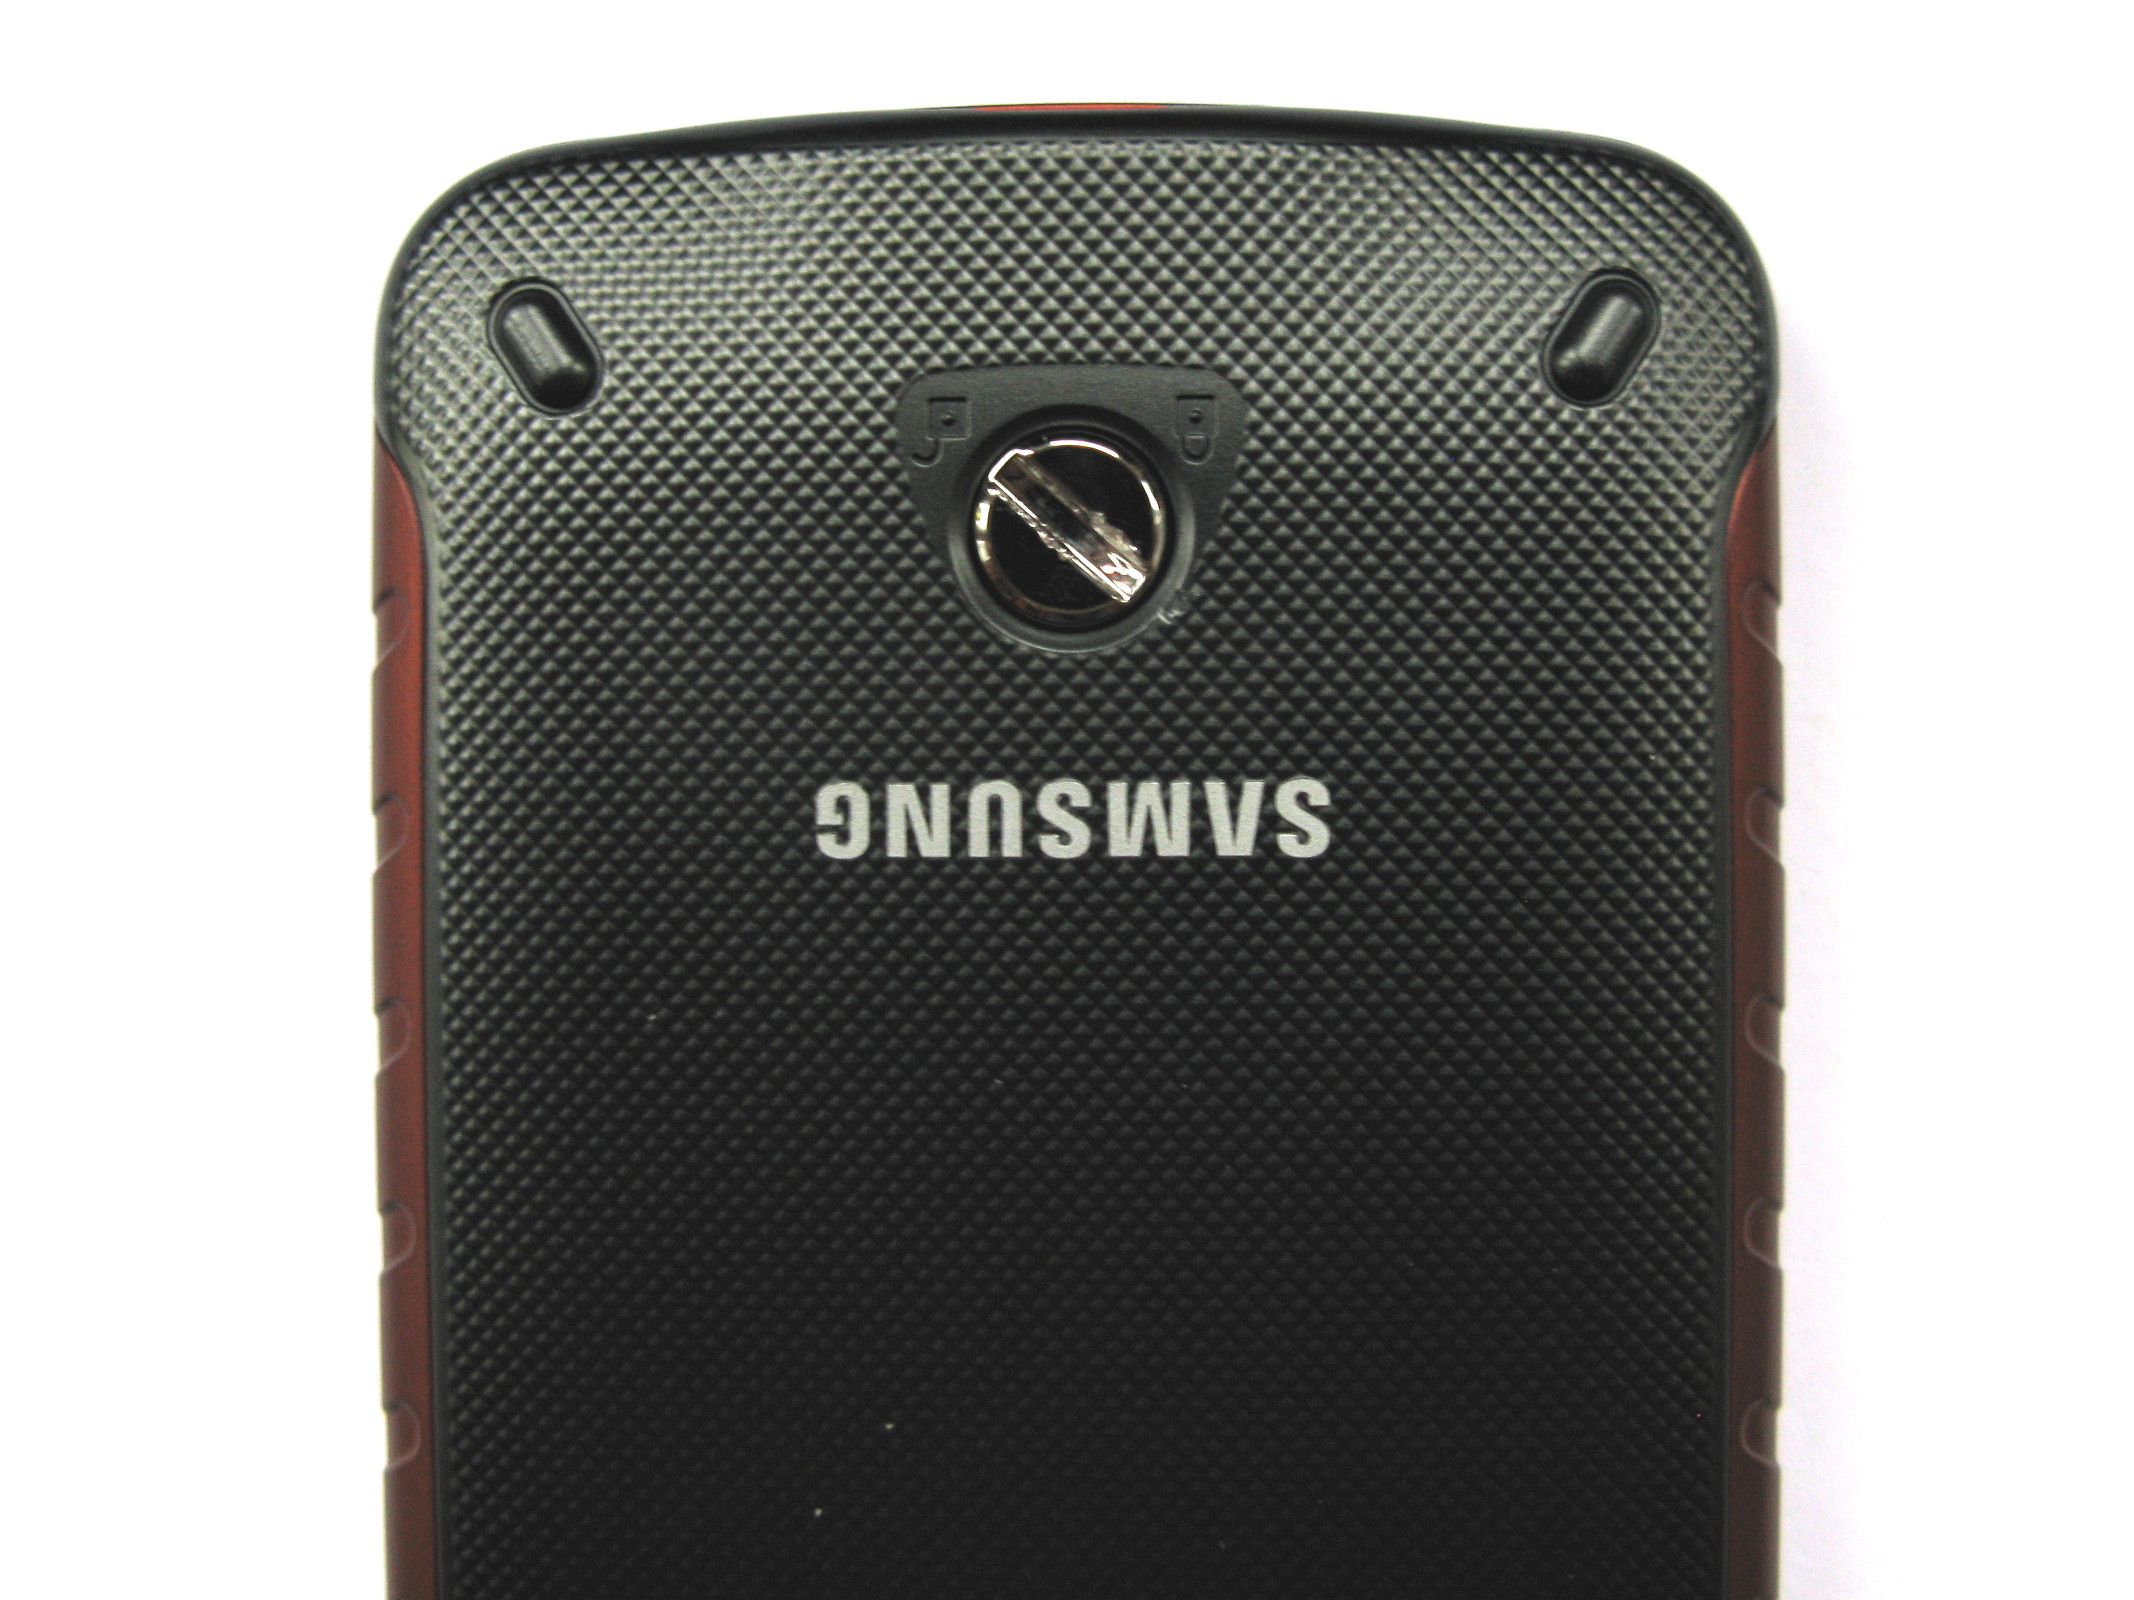 Samsung galaxy xcover extreme s5690 review